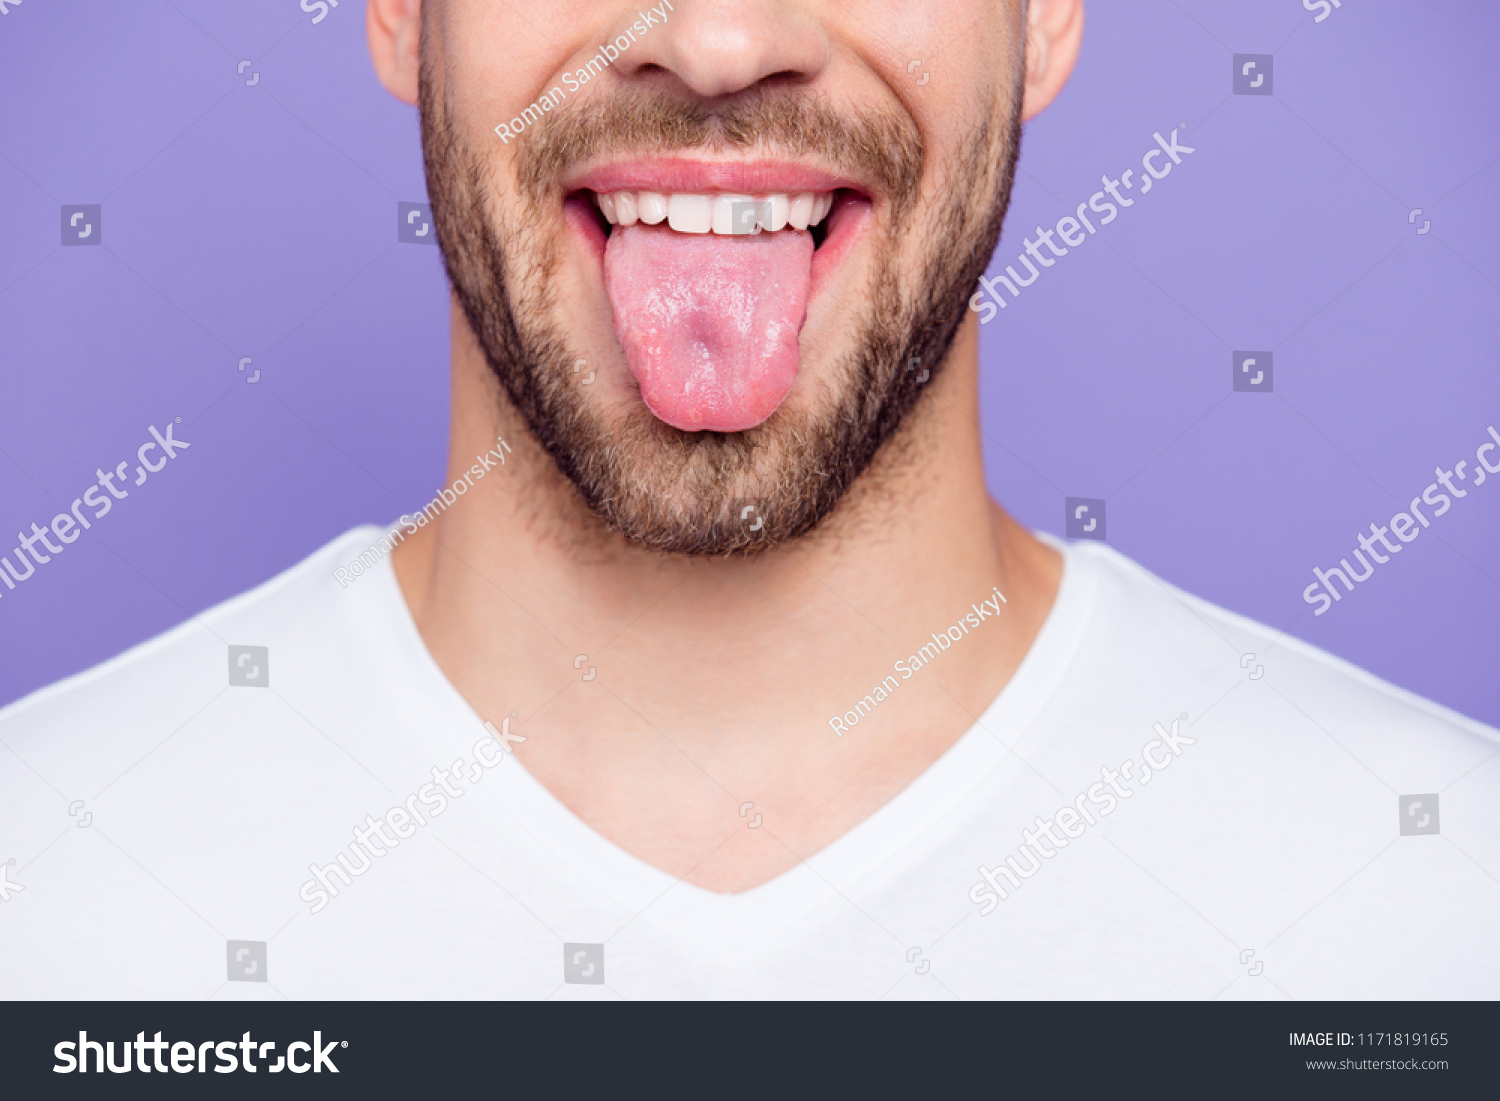 Close-up cropped portrait of attractive, trendy, stylish, toothy man with healthy teeth, showing tongue out, over pastel violet purple background #1171819165